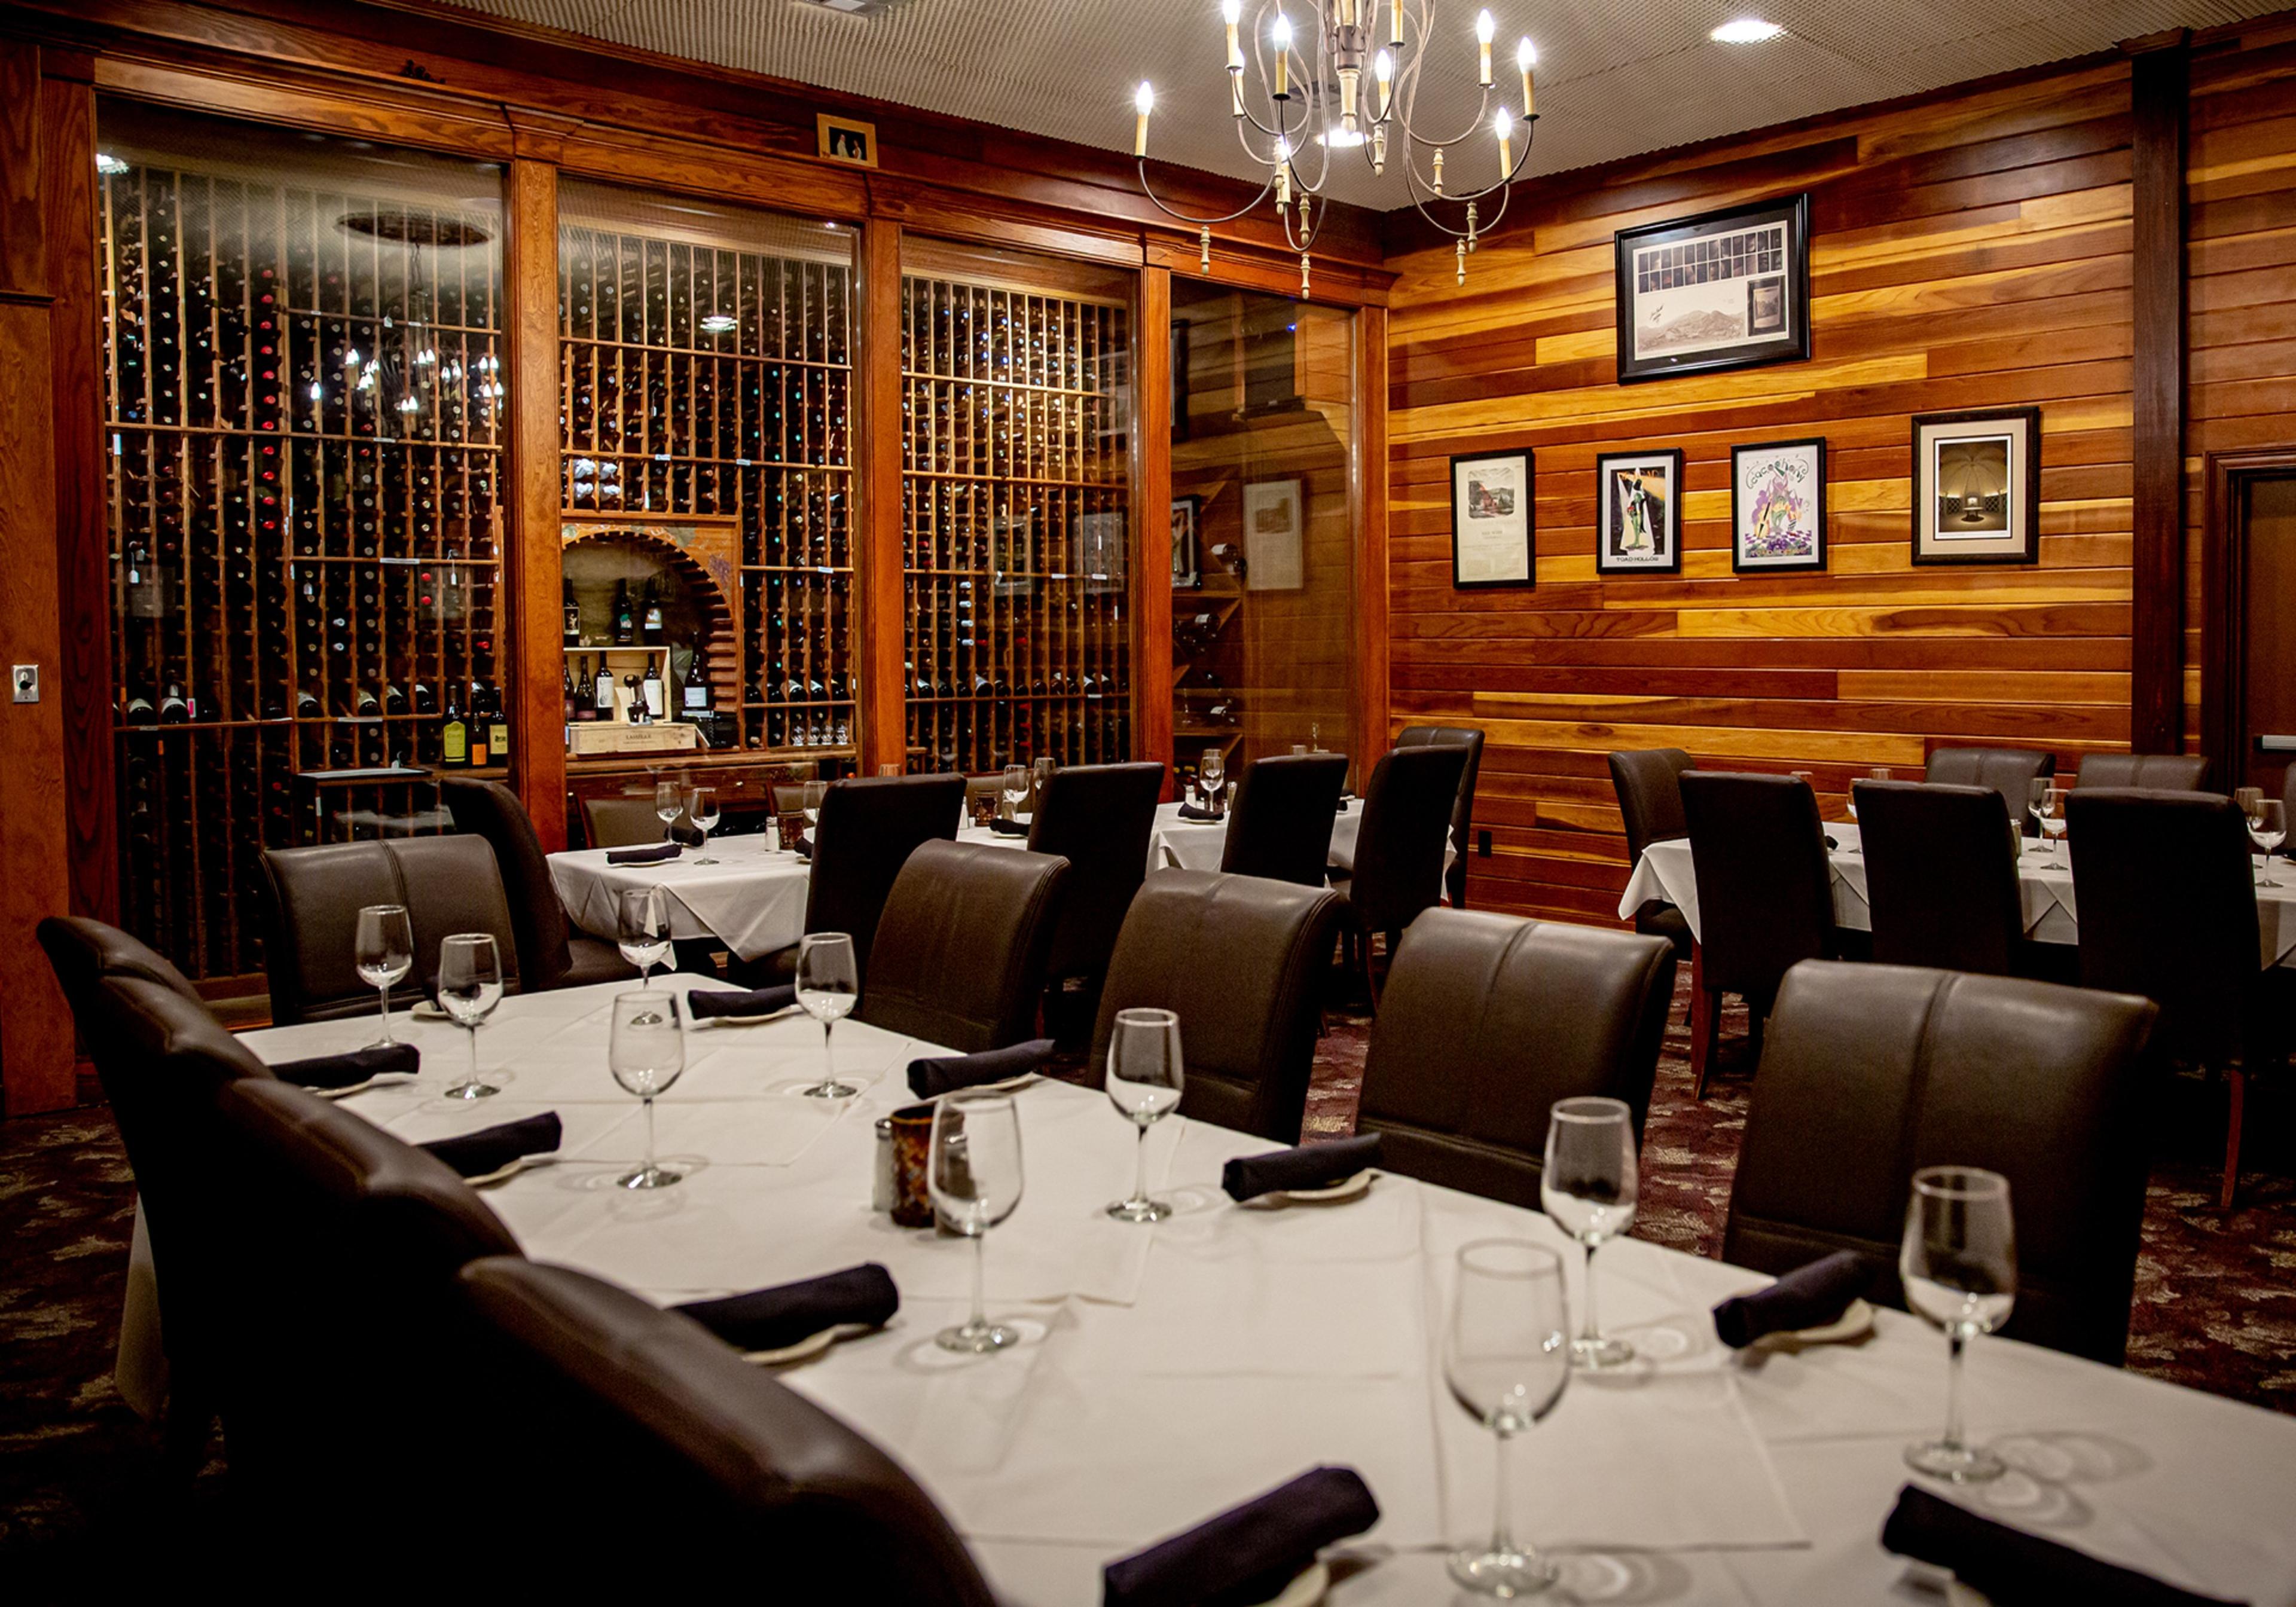 Keith Young's Steakhouse